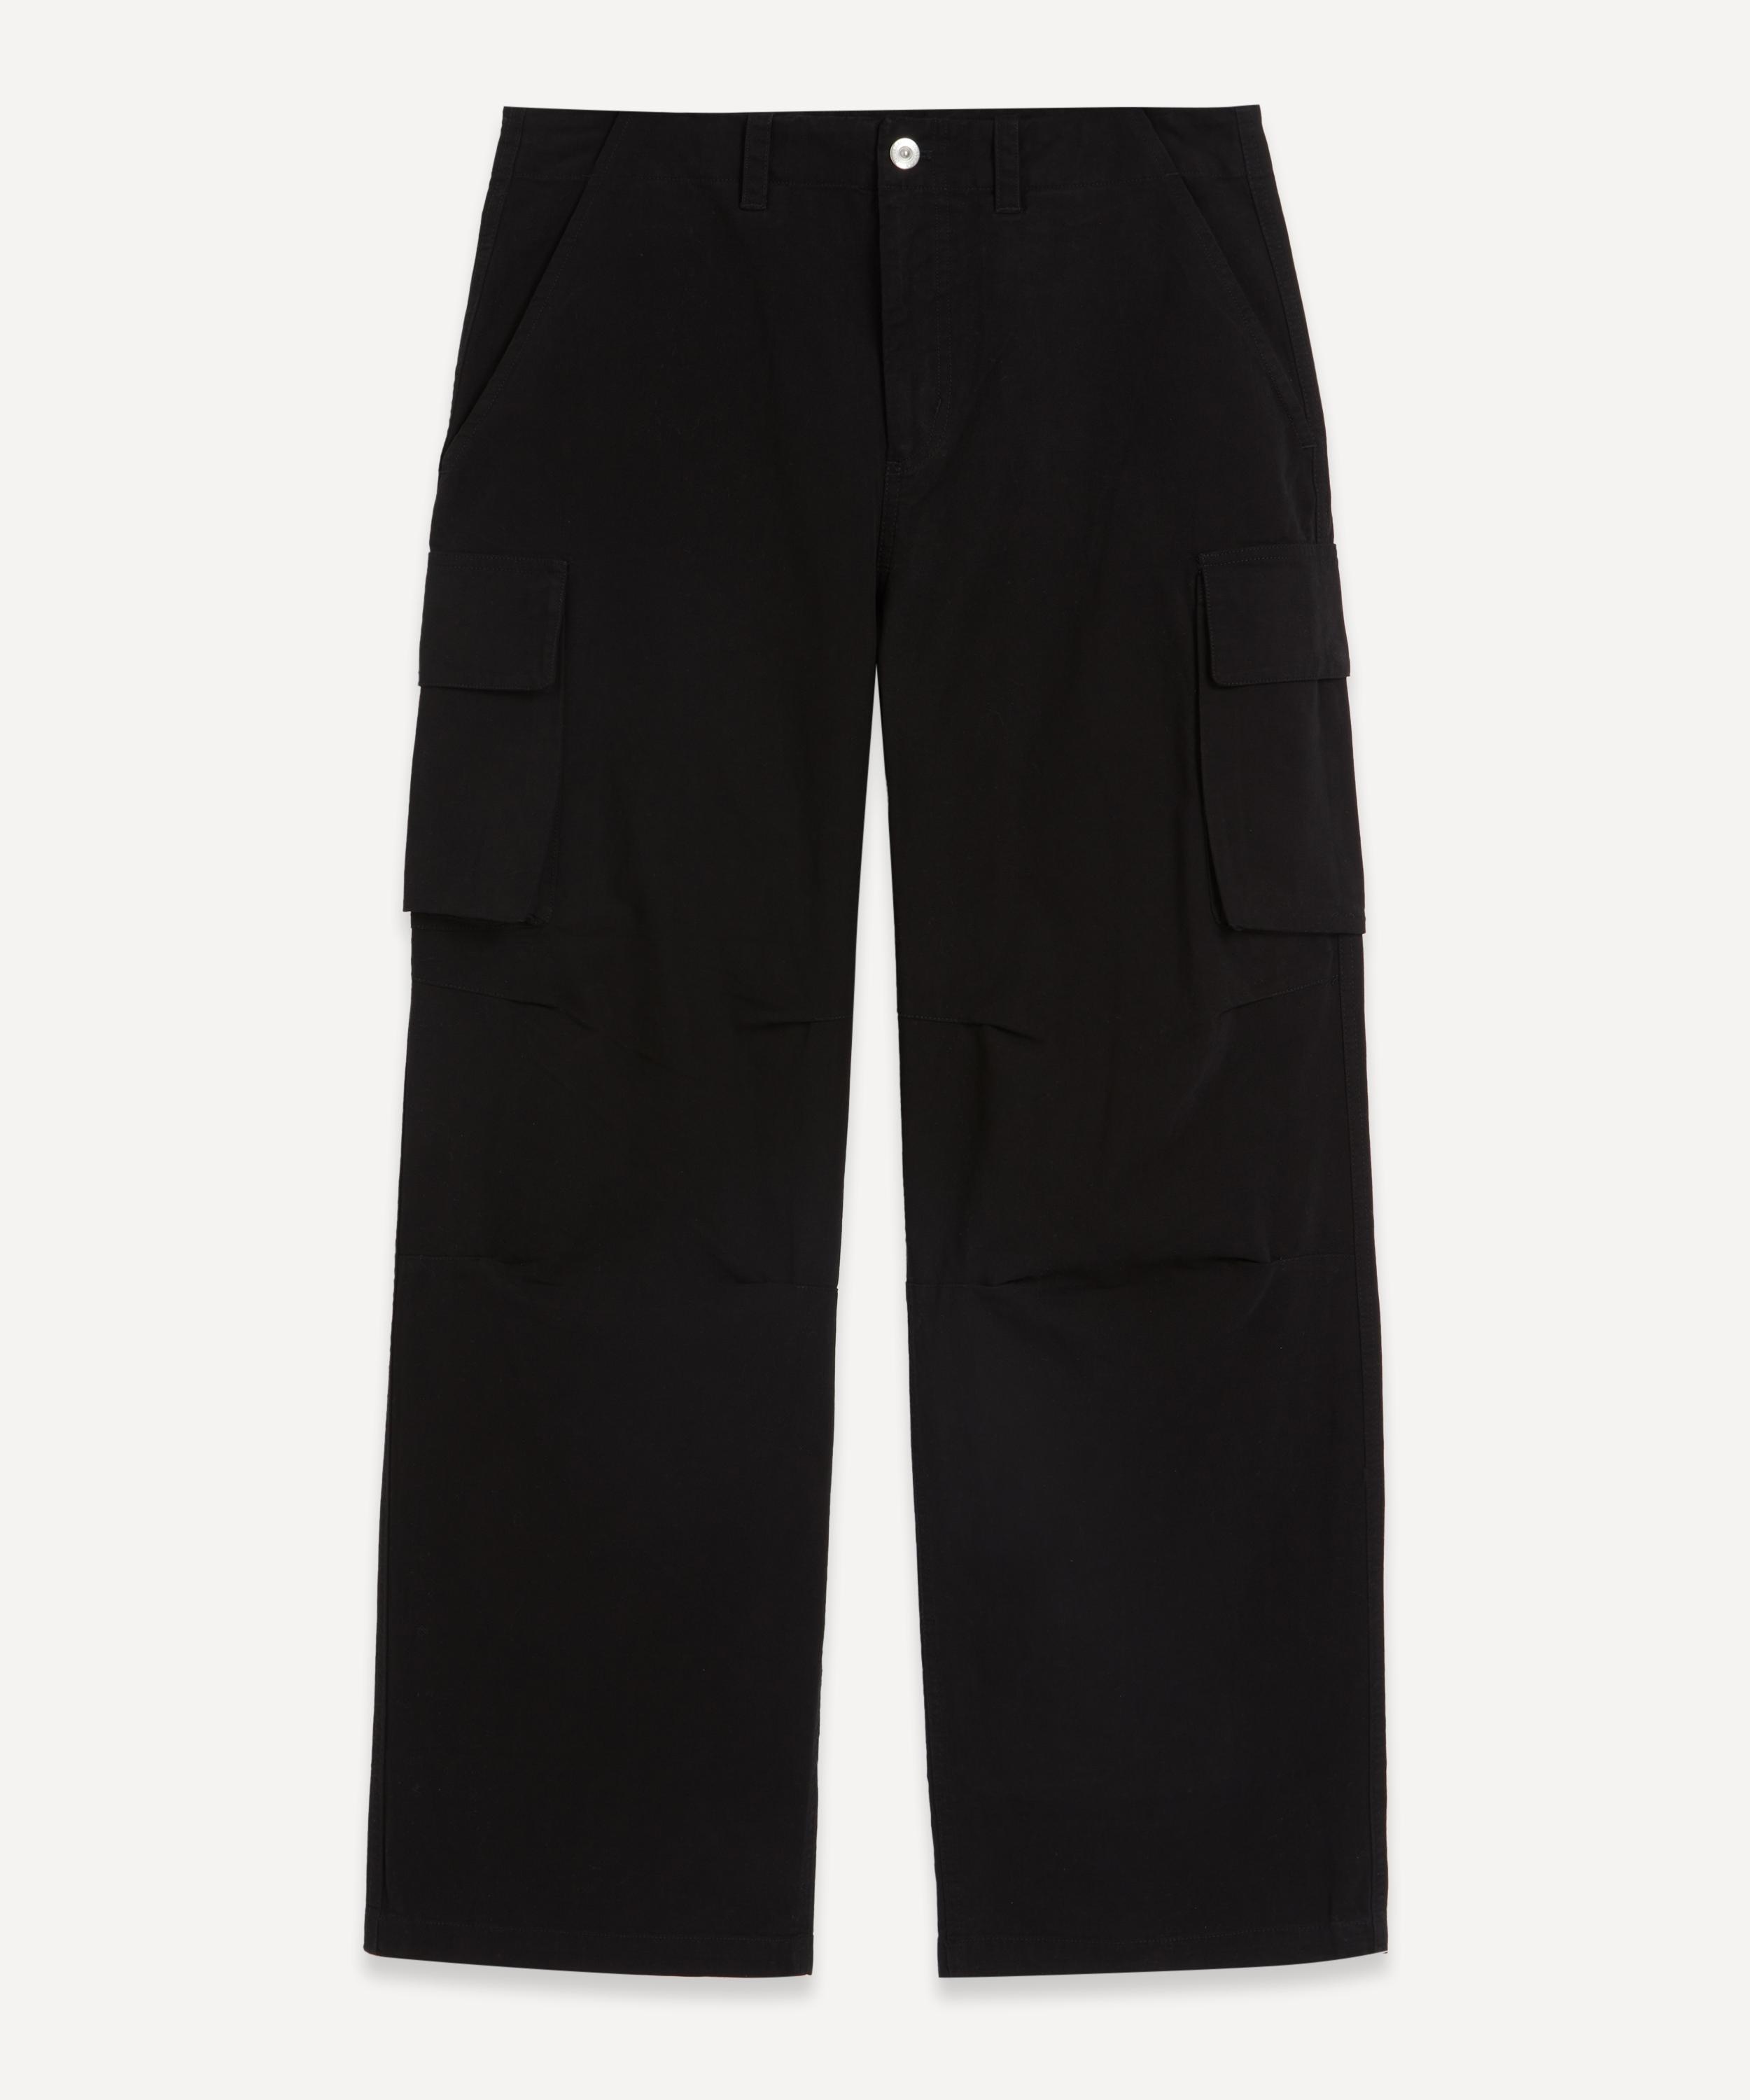 Mount Cargo Trousers - 1